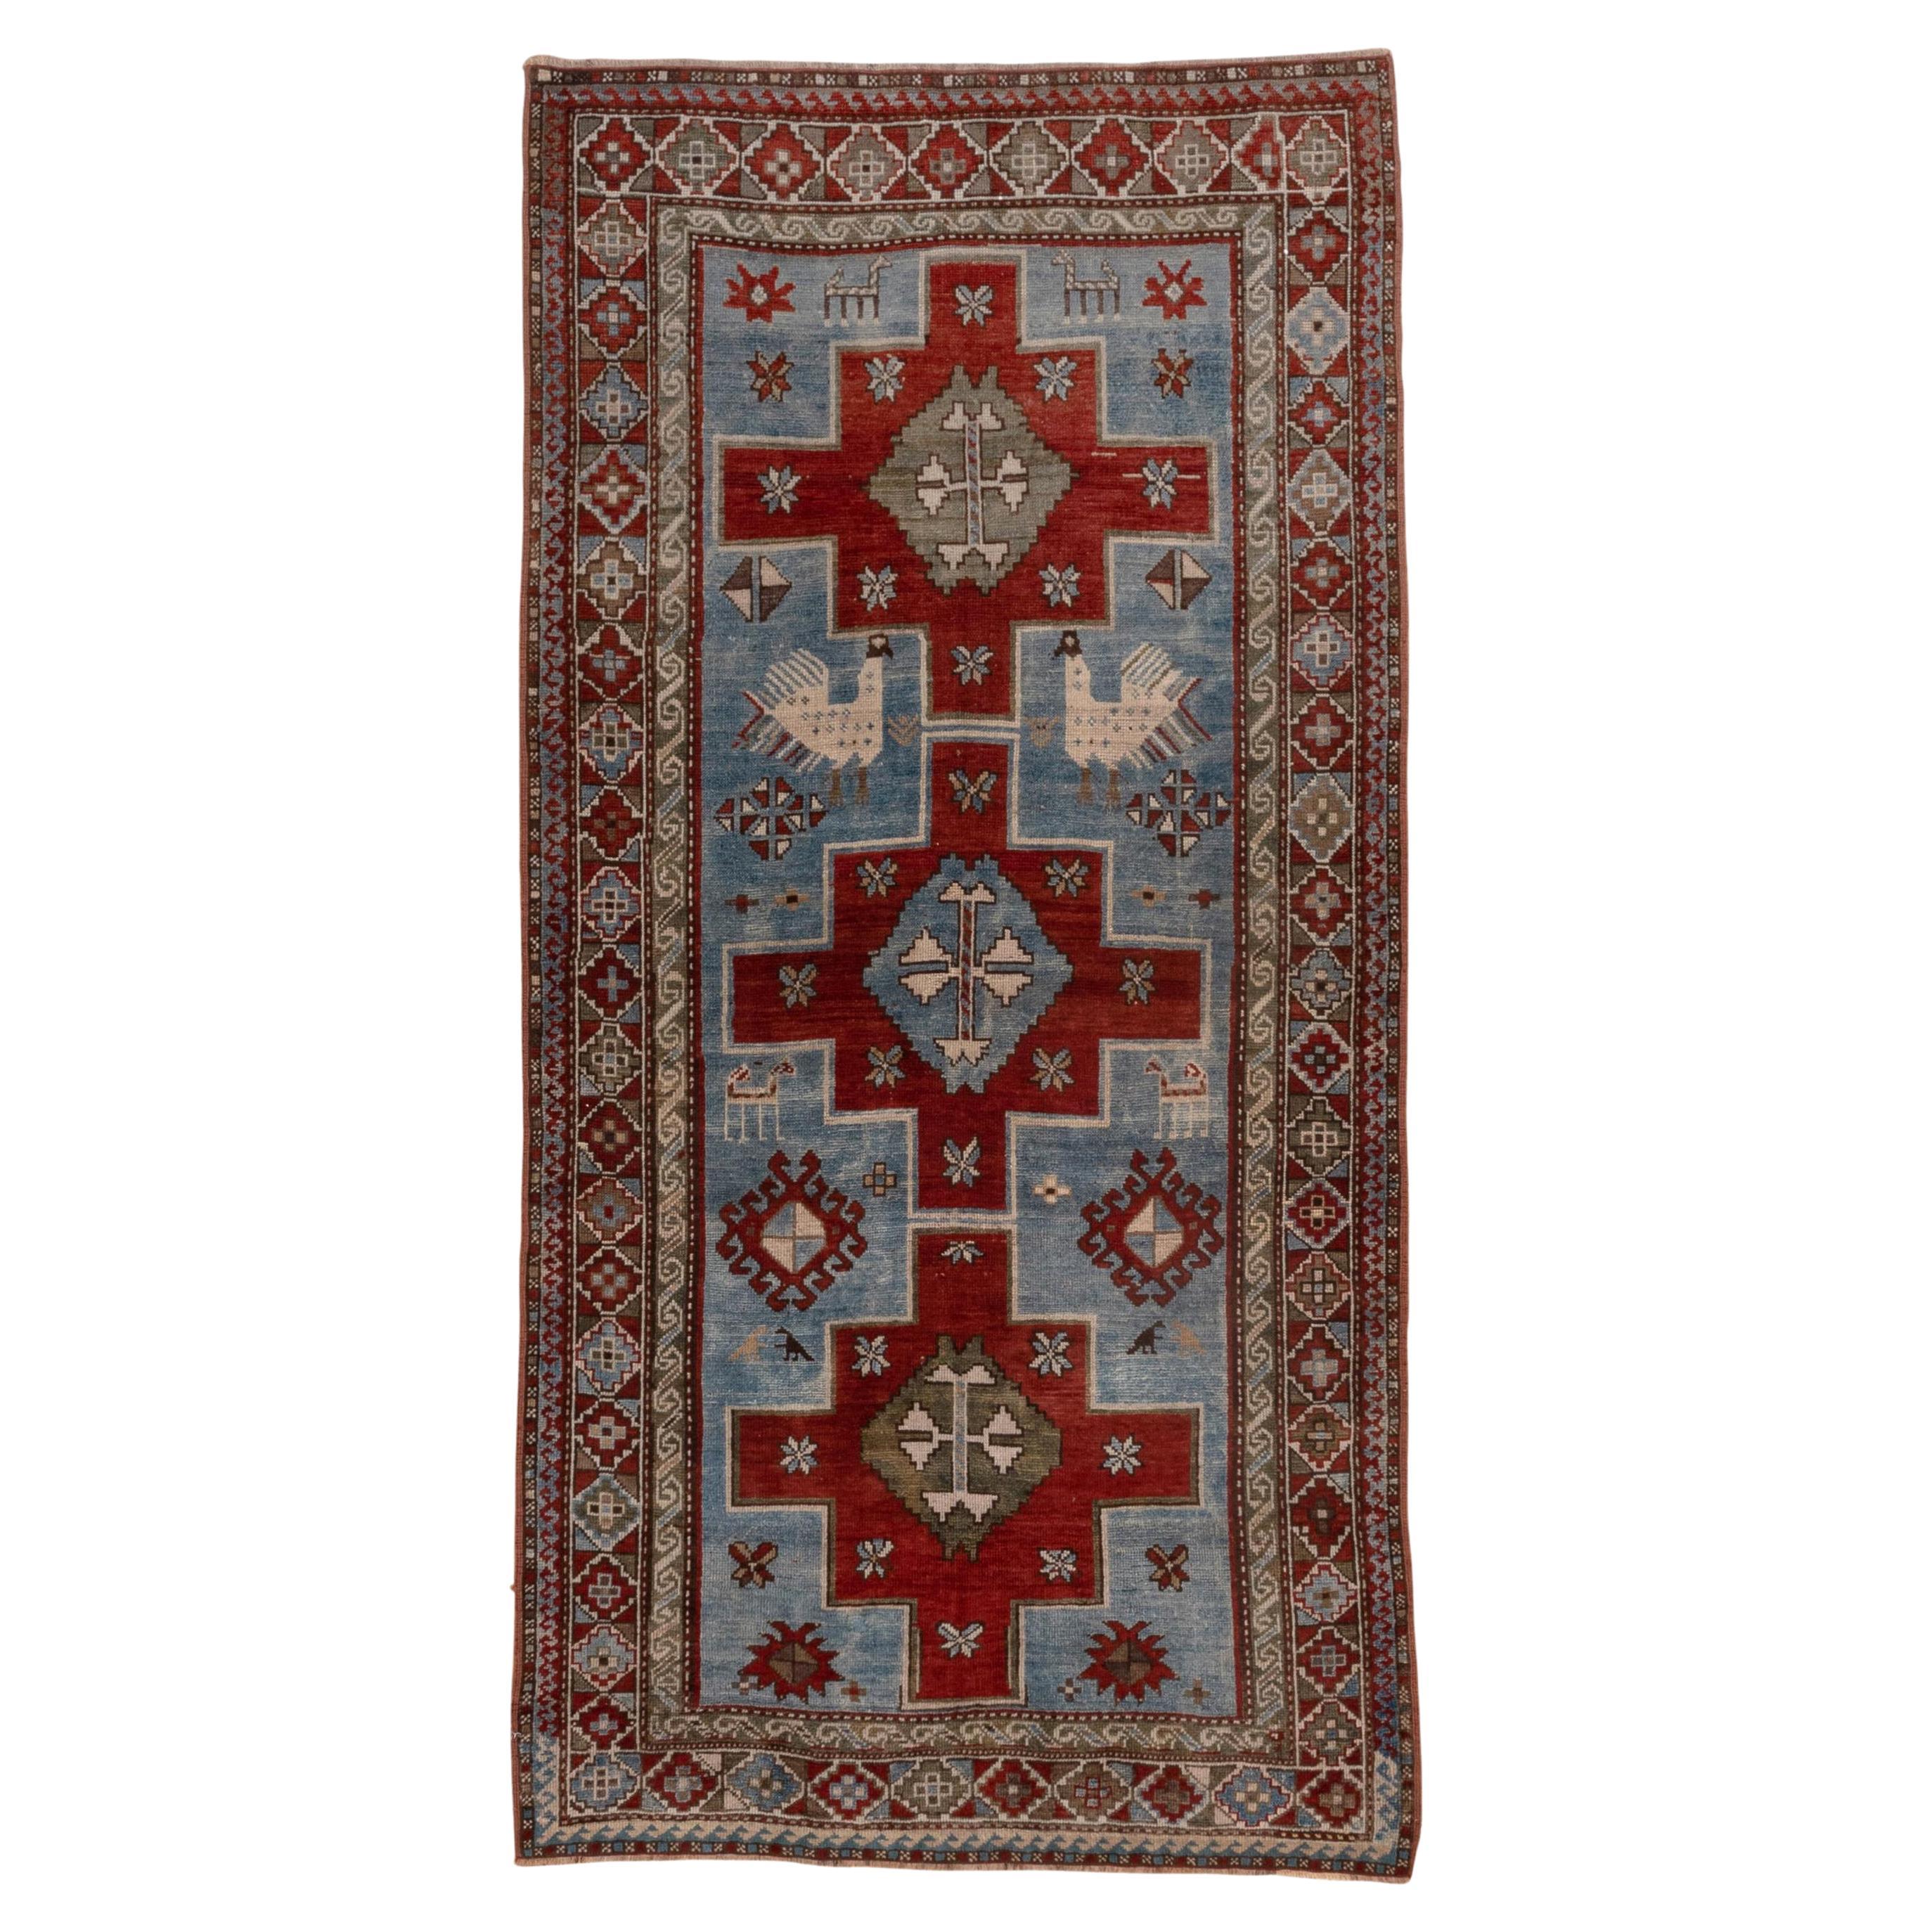 Antique Tribal Caucasian Rug, Blue and Red Field, Green Accents, Kazak Style